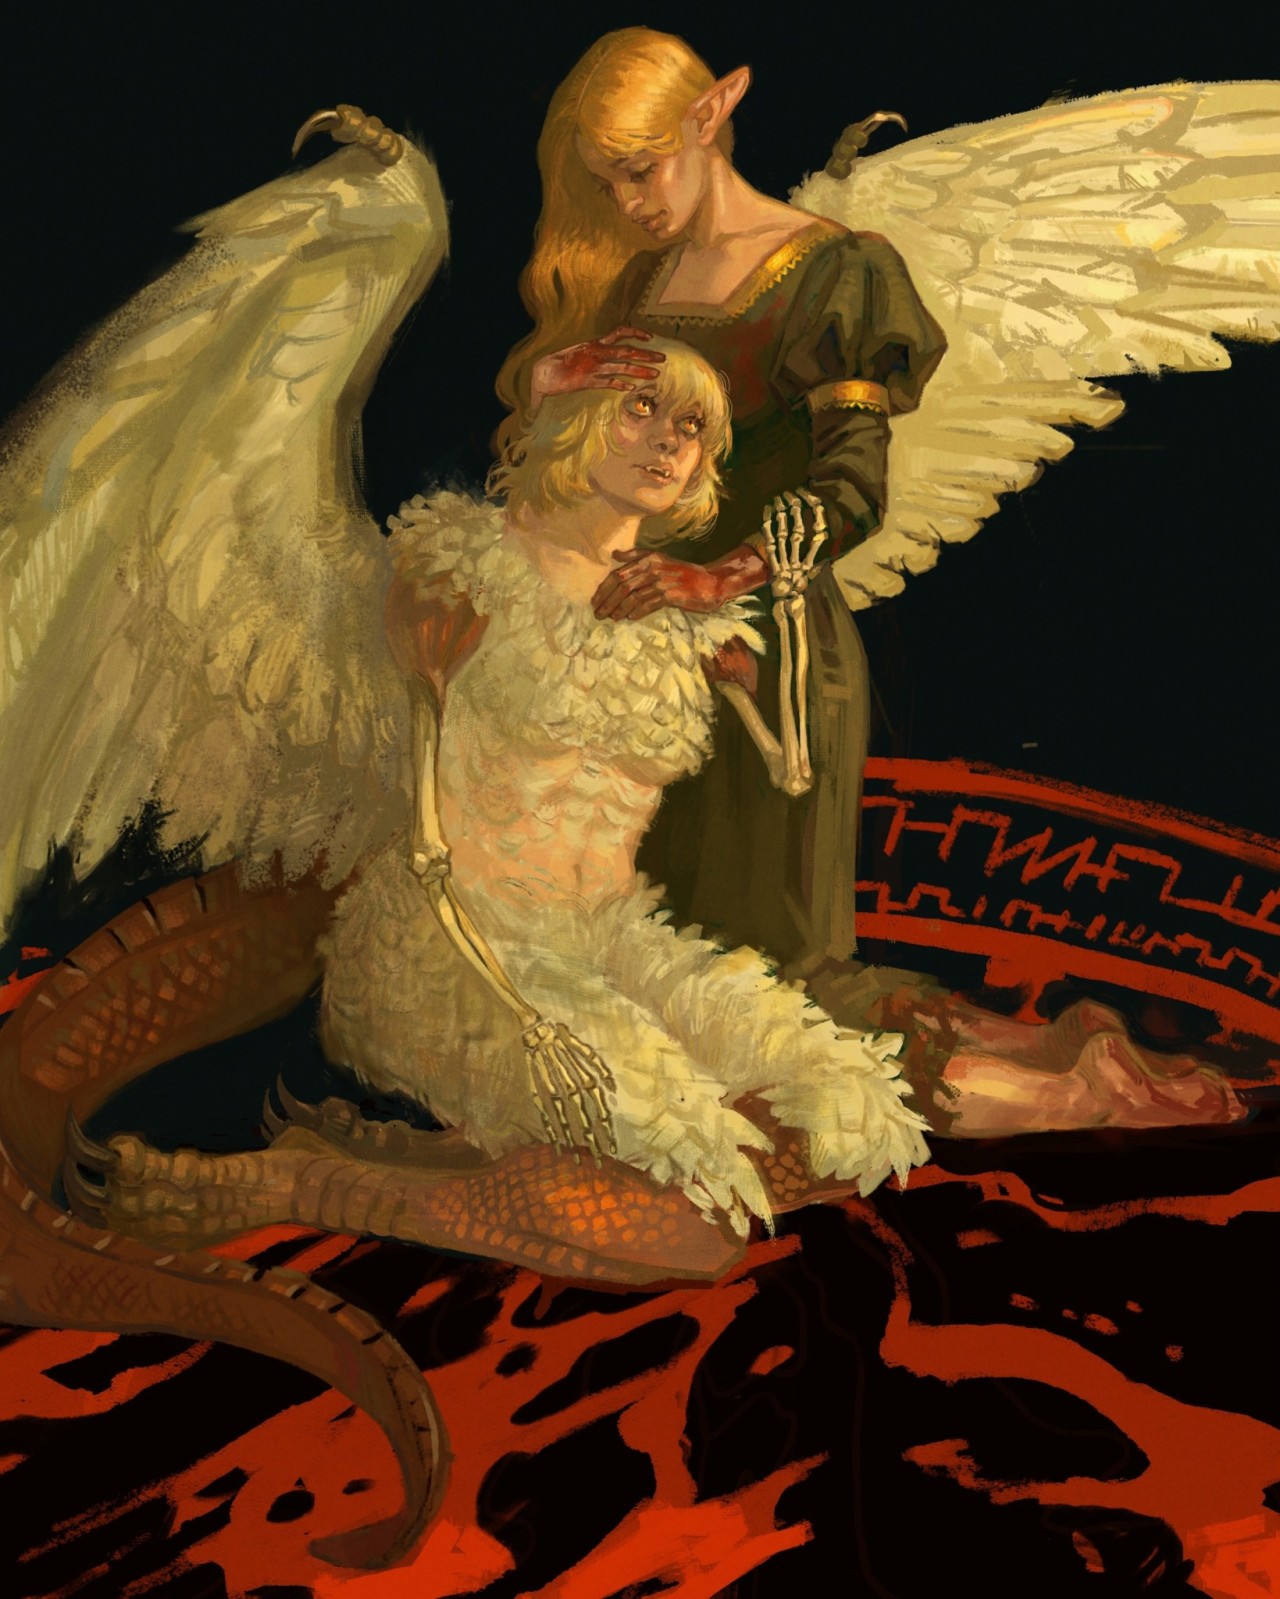 a close-up of the painting below, depicting Marcille and Falin from Dungeon Meshi.